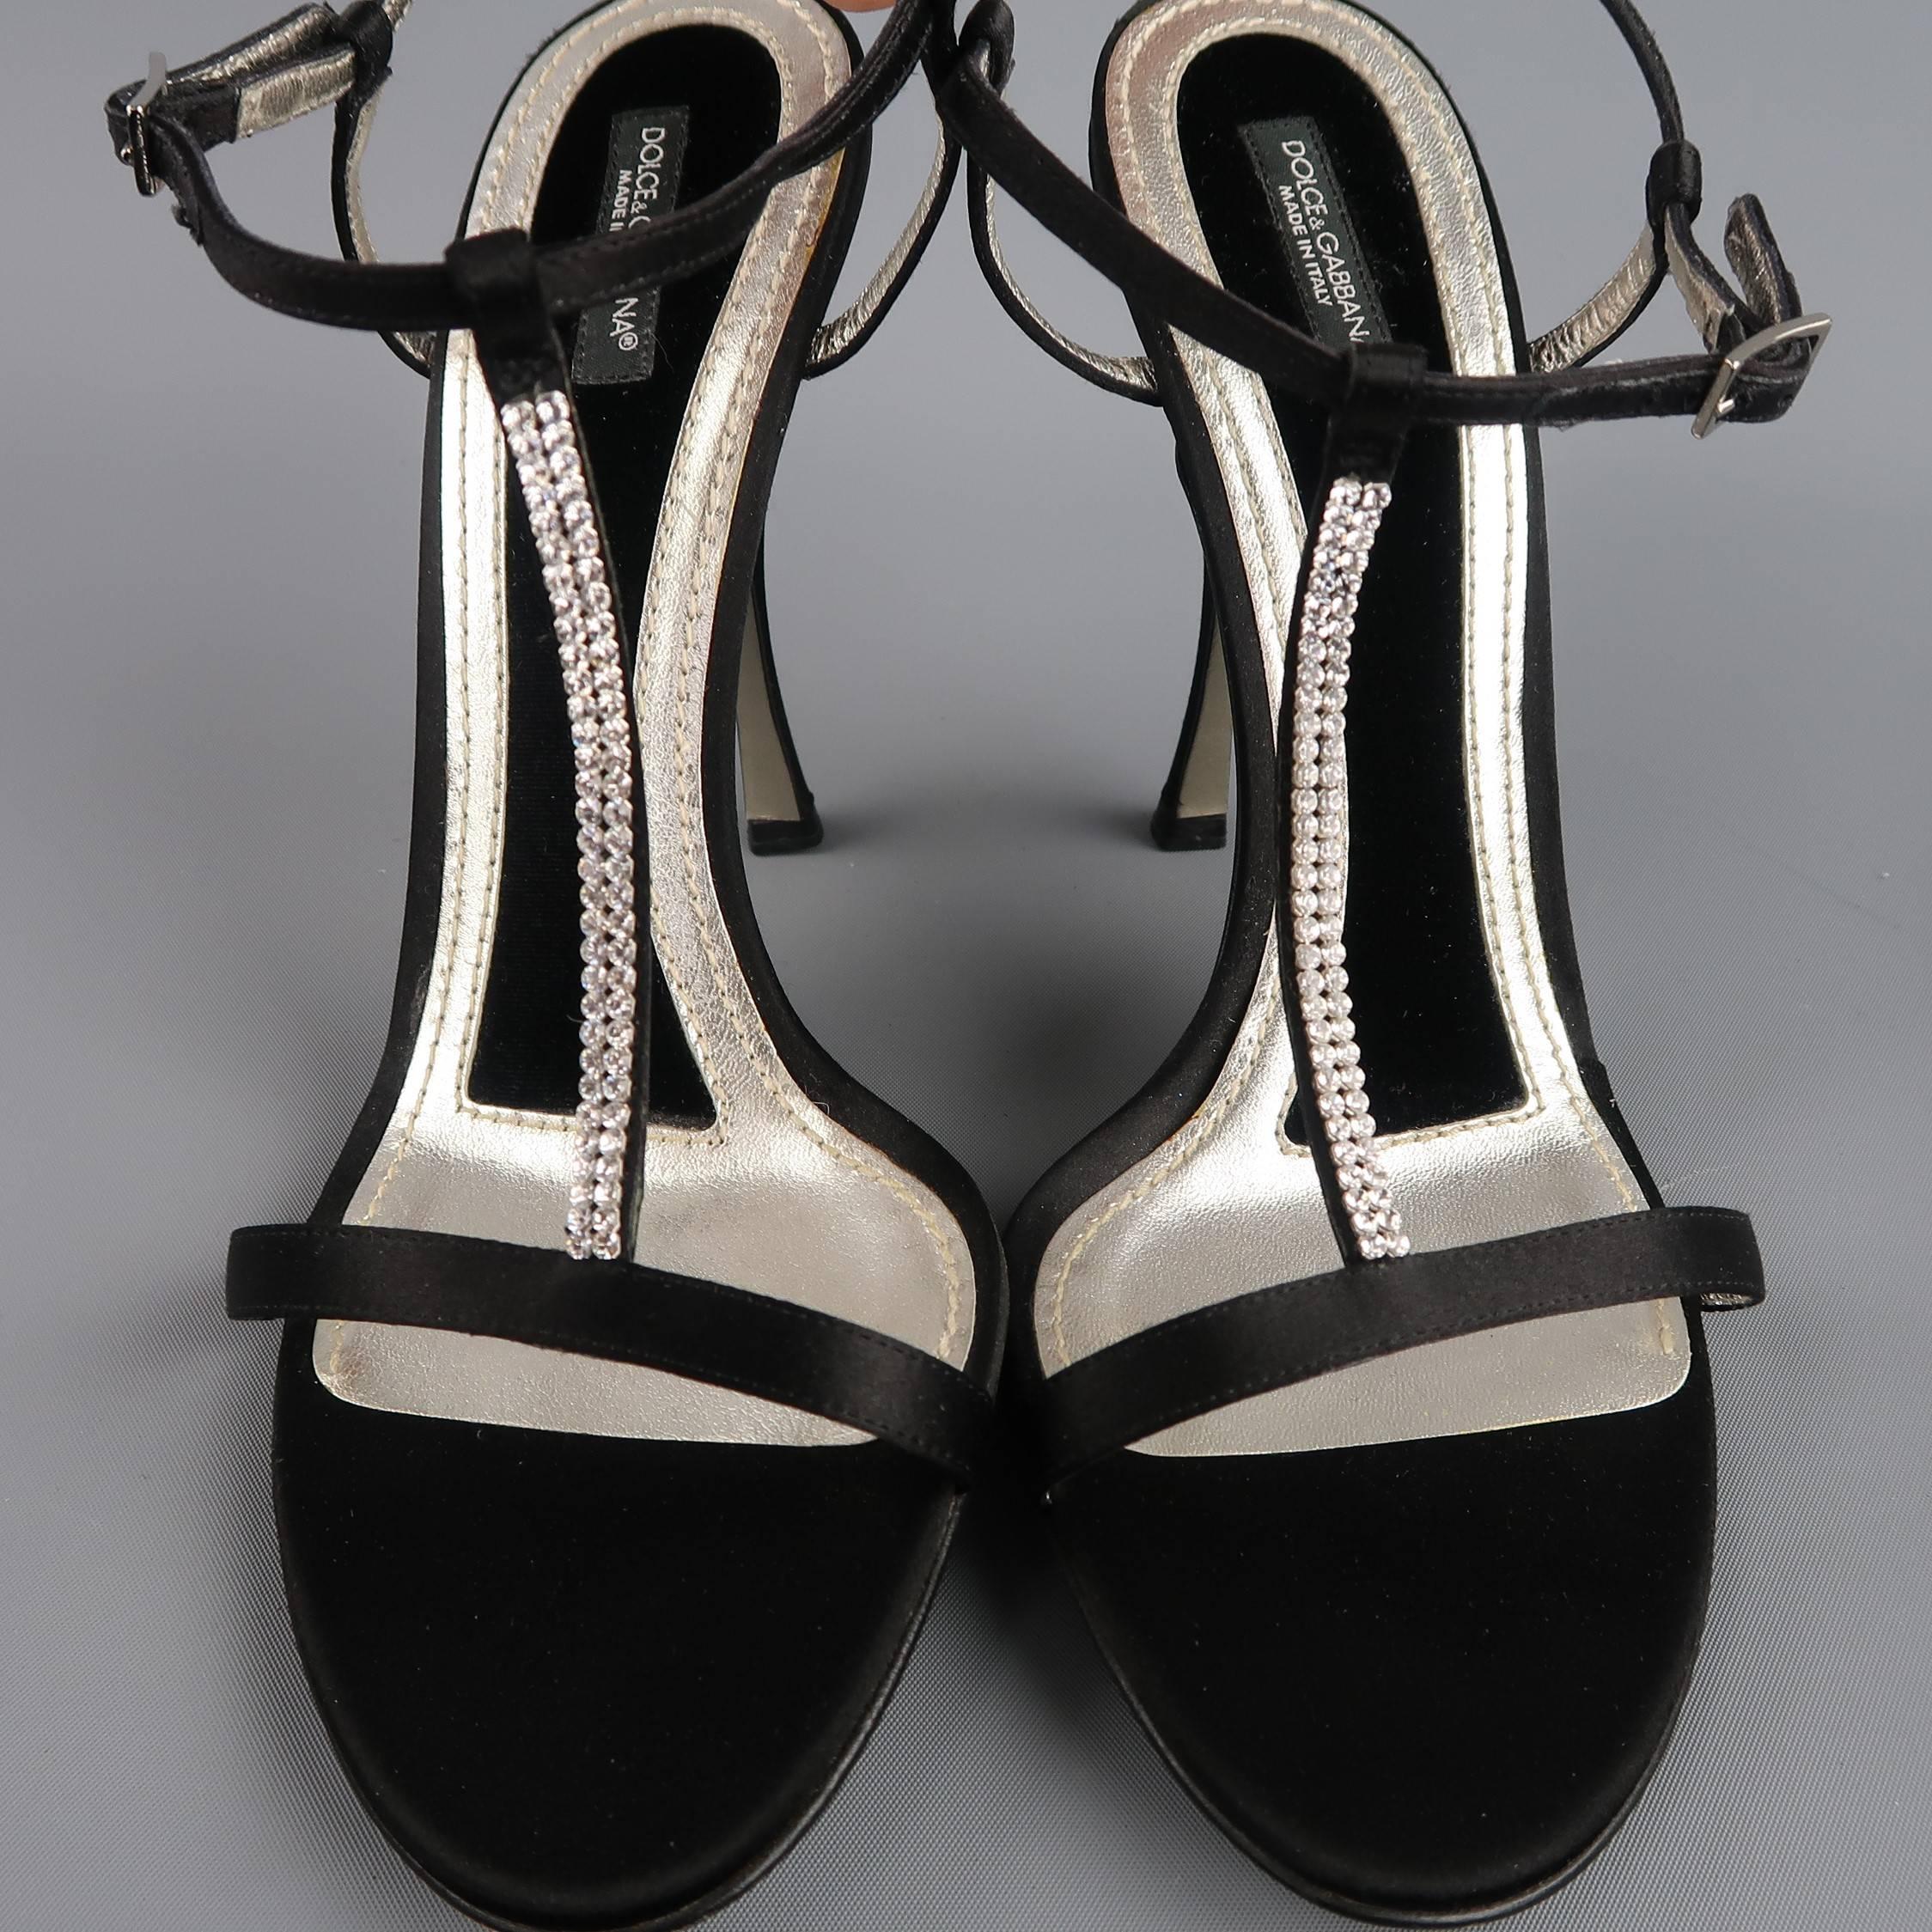 These fabulous DOLCE & GABBANA evening sandals feature a black silk satin & silver metallic leather sole with velvet padding, silk covered stiletto heel, skinny toe strap, ankle harness, and rhinestone studded T strap. Made in Italy.
 
Good